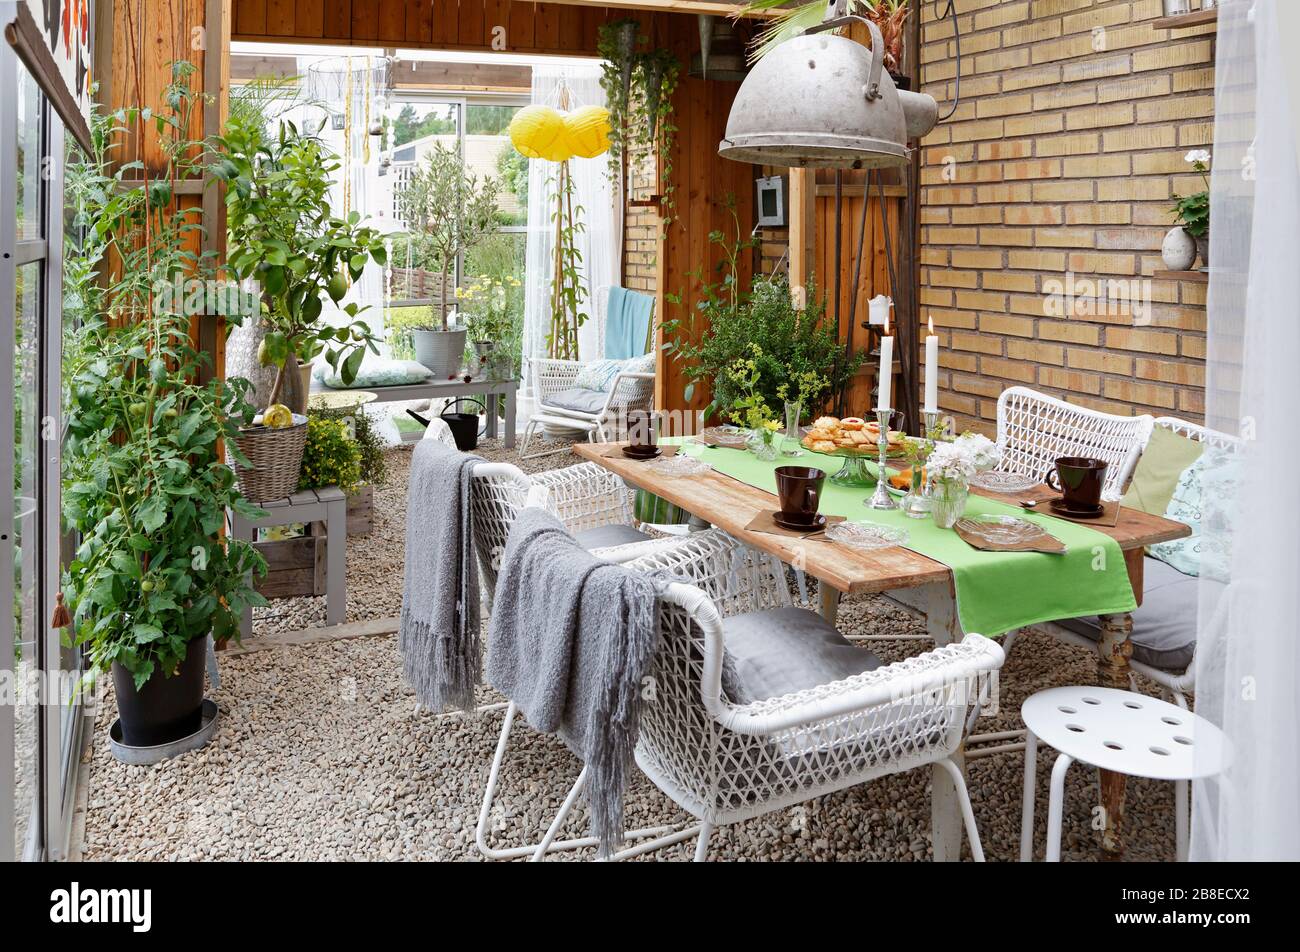 Orangery - glass enclosed seating area with plants Stock Photo